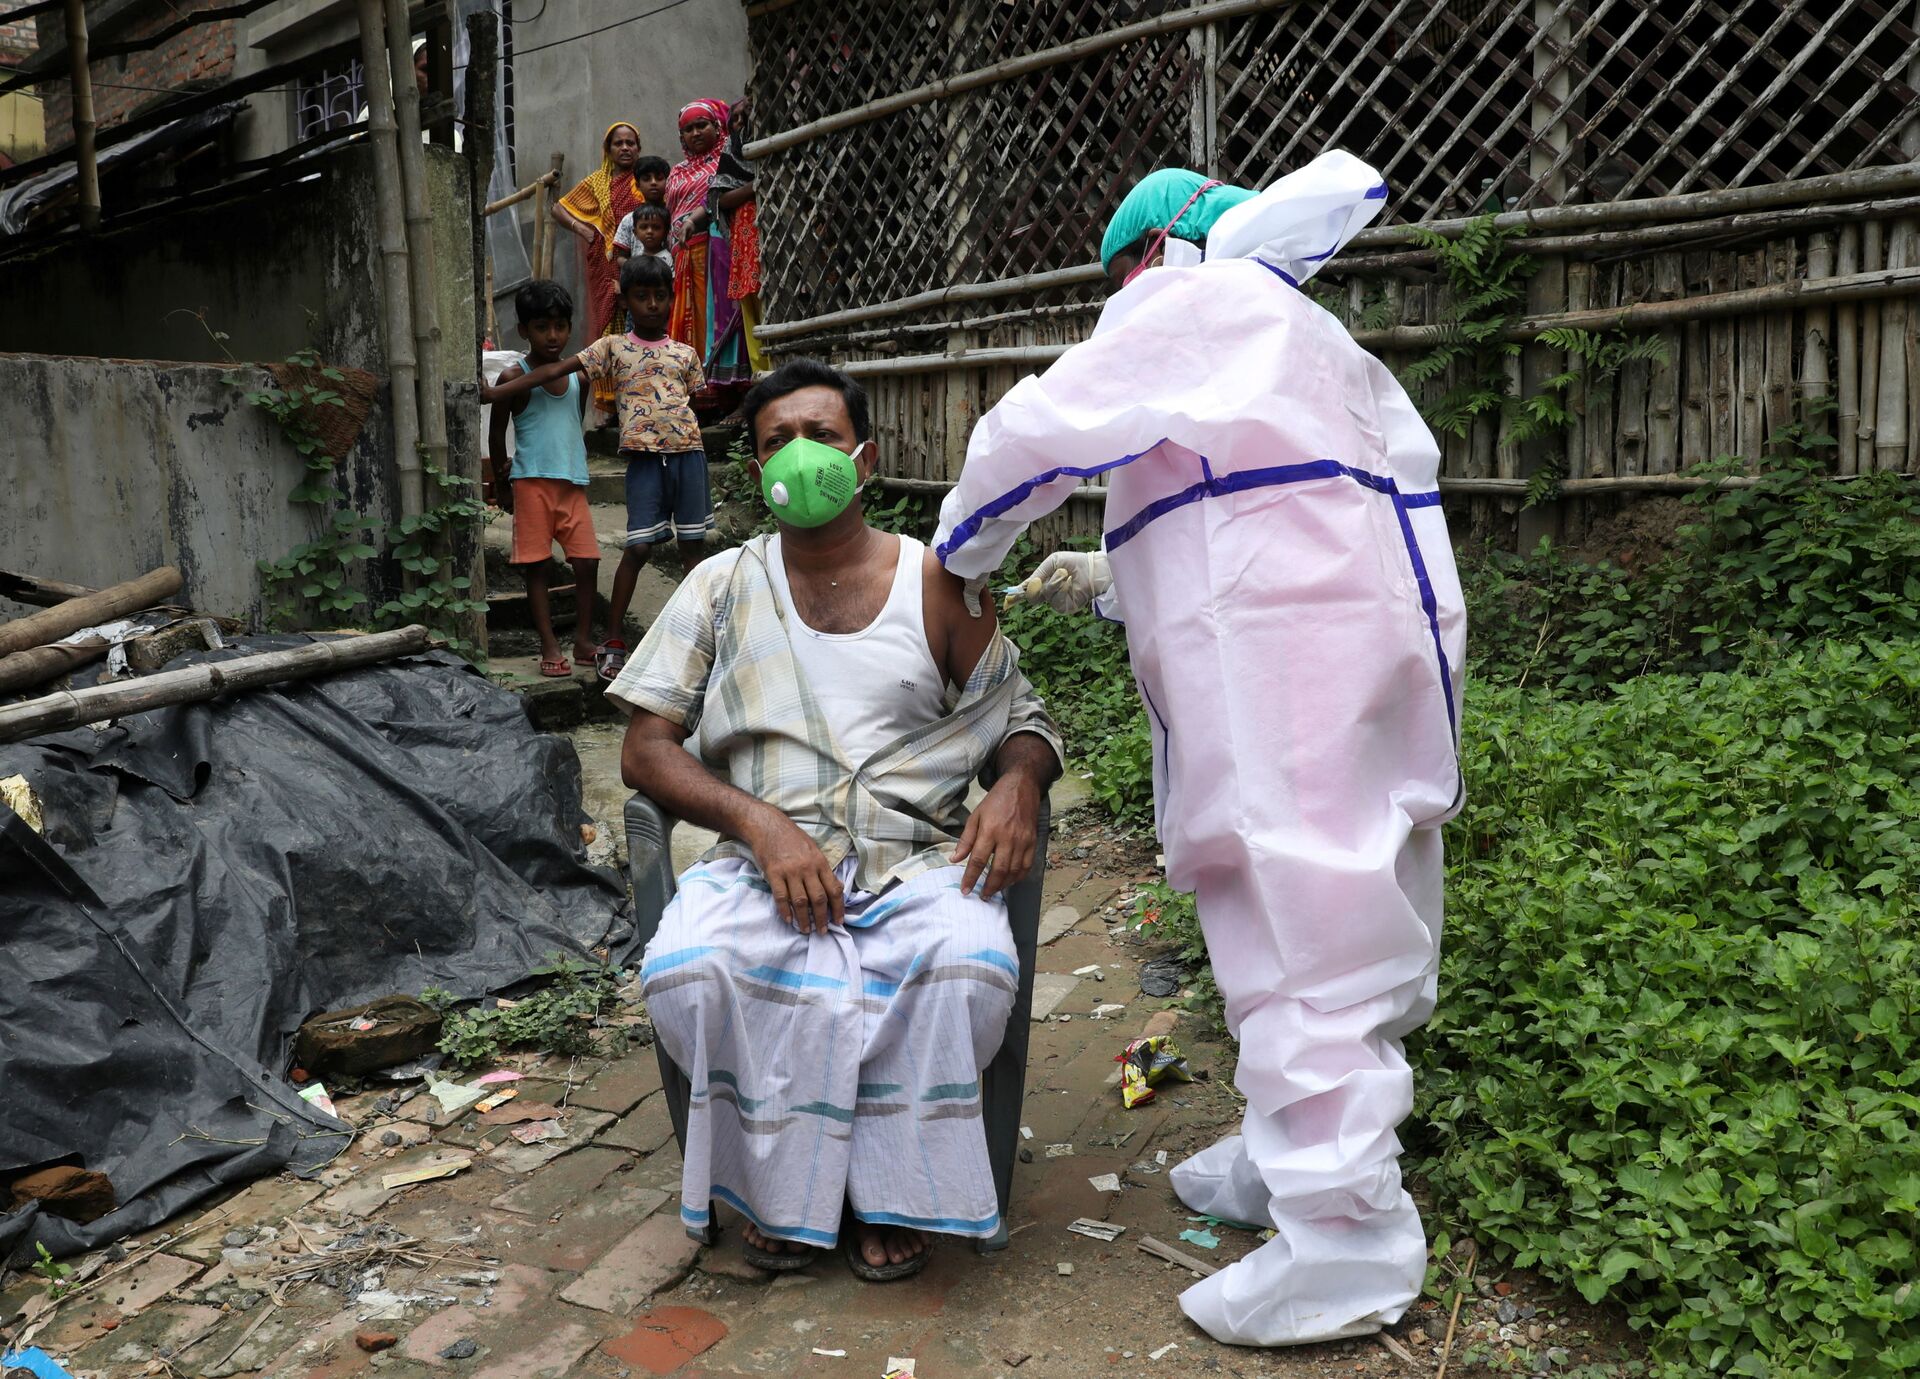 Yusuf Ali, a villager, receives a dose of COVISHIELD vaccine, a coronavirus disease (COVID-19) vaccine manufactured by Serum Institute of India, during a door-to-door vaccination and testing drive at Uttar Batora Island in Howrah district in West Bengal state, India, June 21, 2021 - Sputnik International, 1920, 25.09.2021